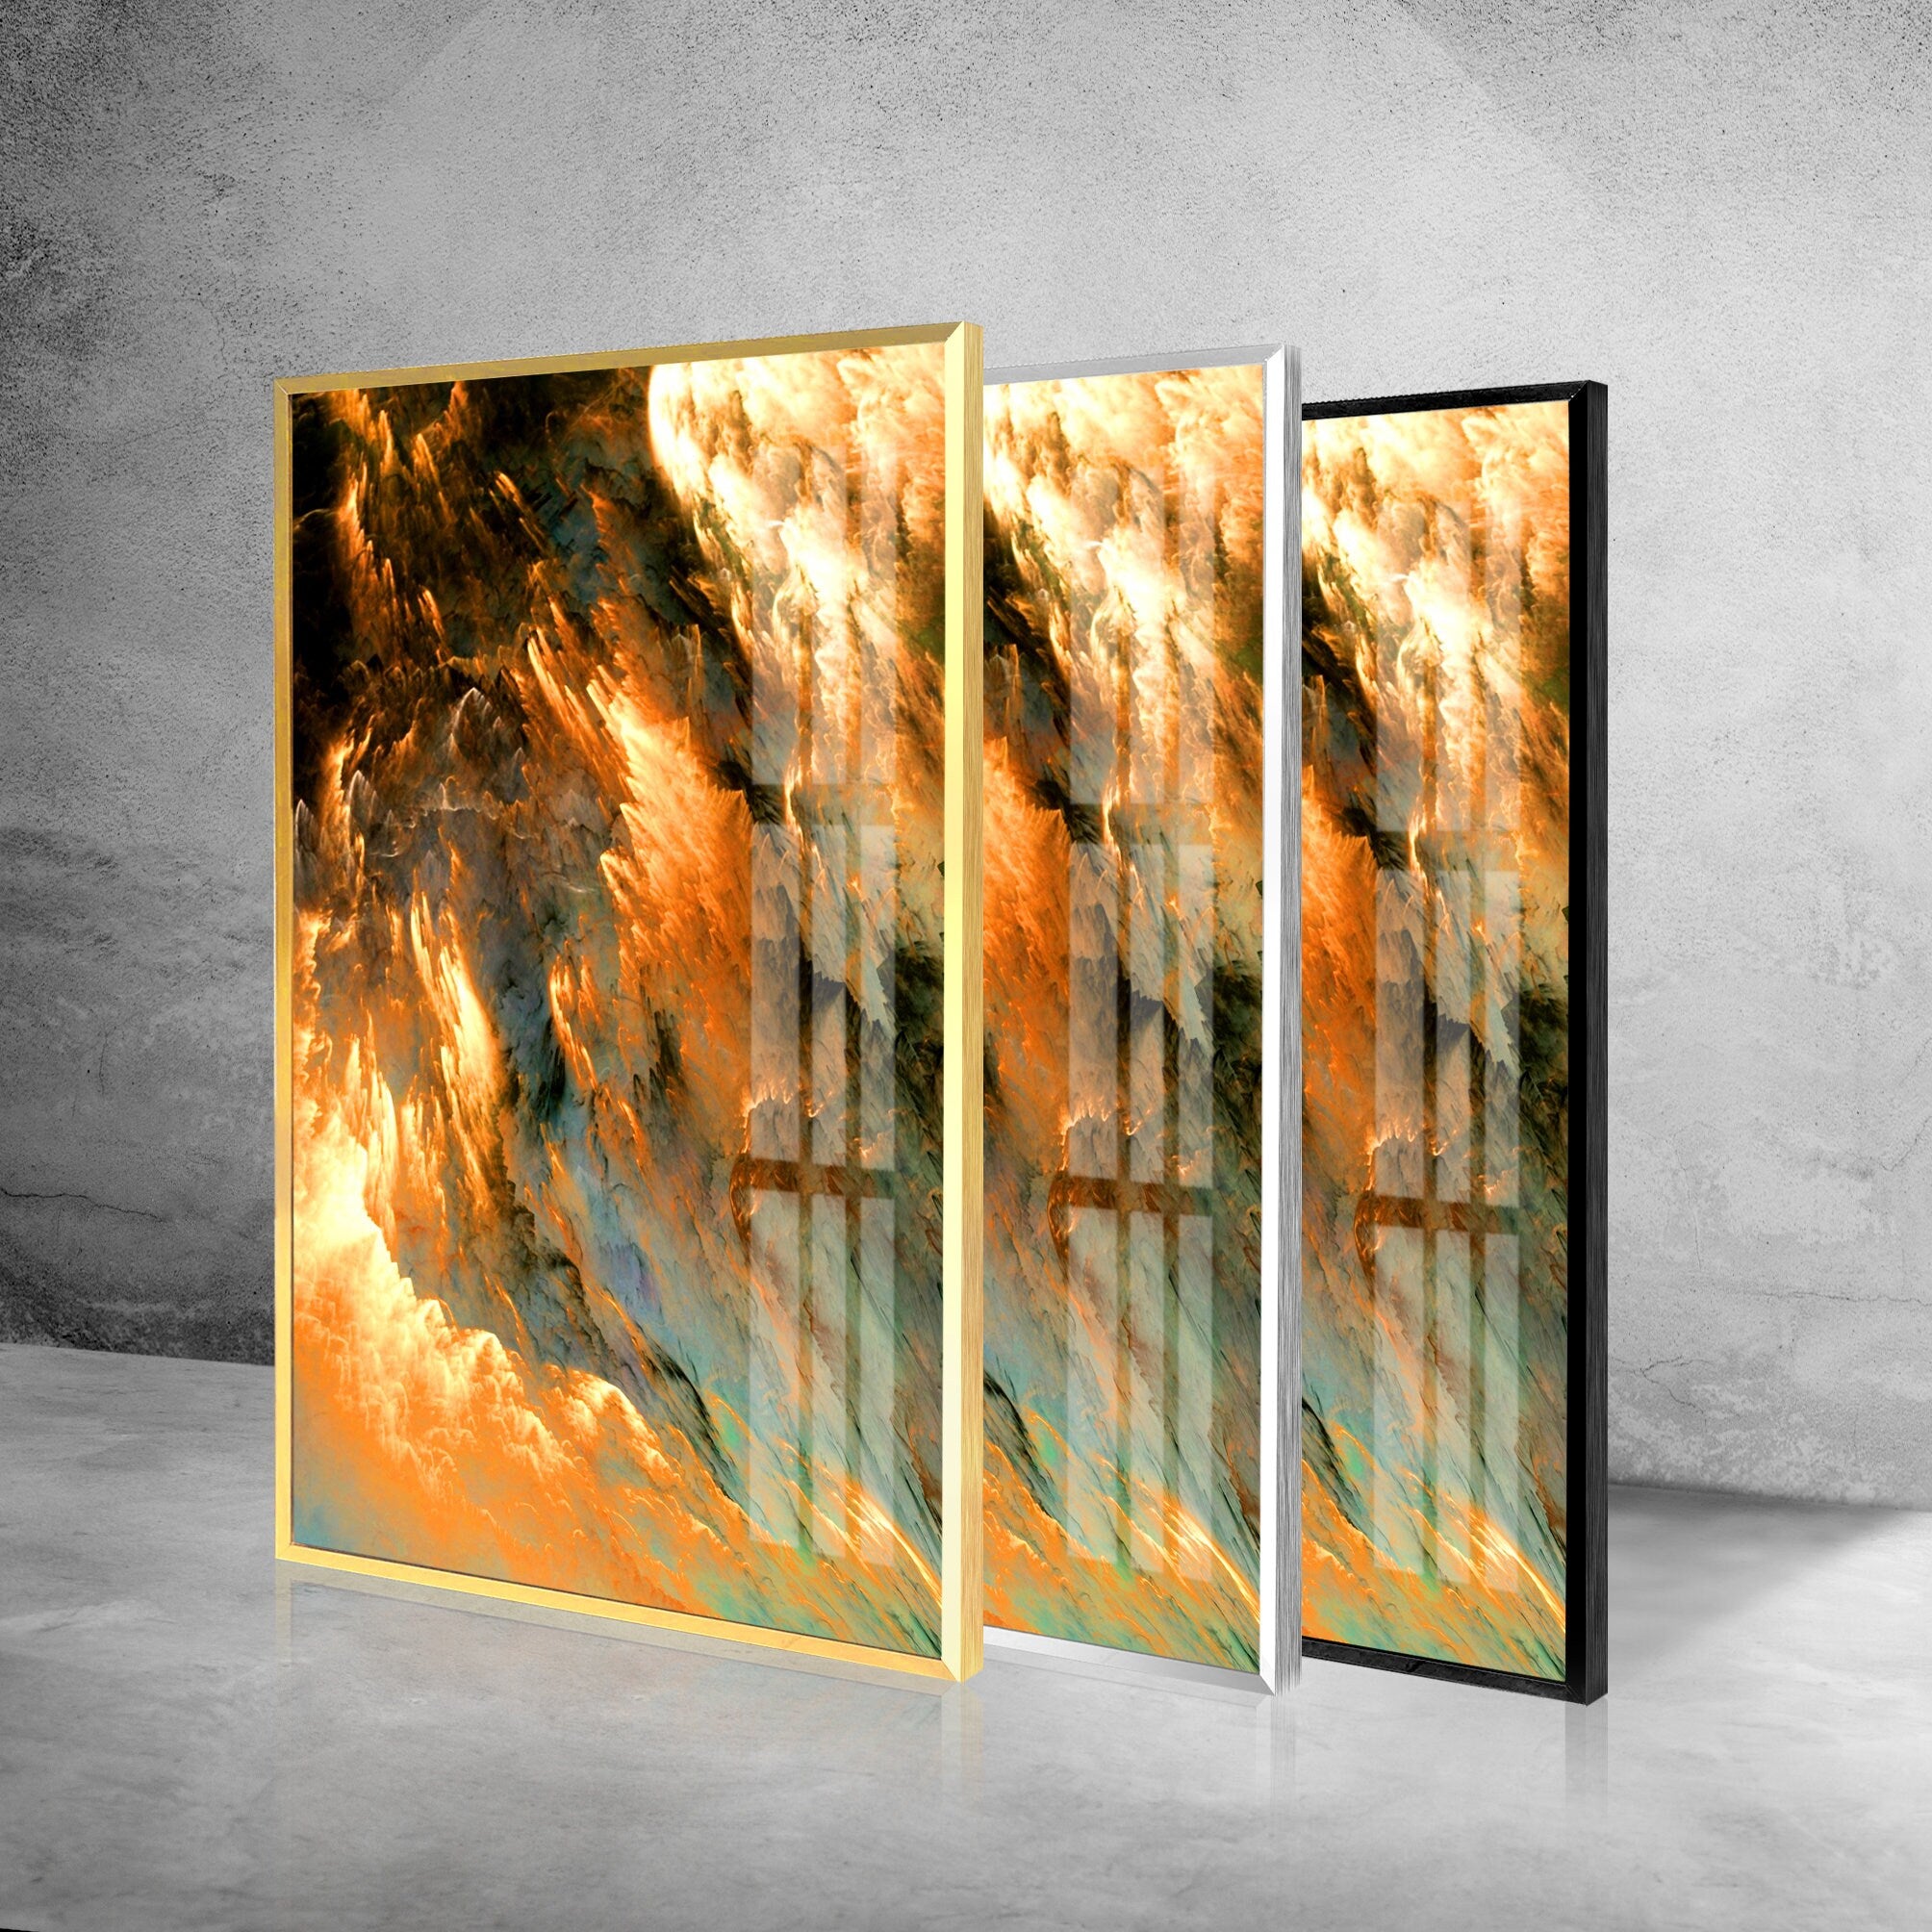 Modern Decorative Abstract Tempered Glass Wall Art